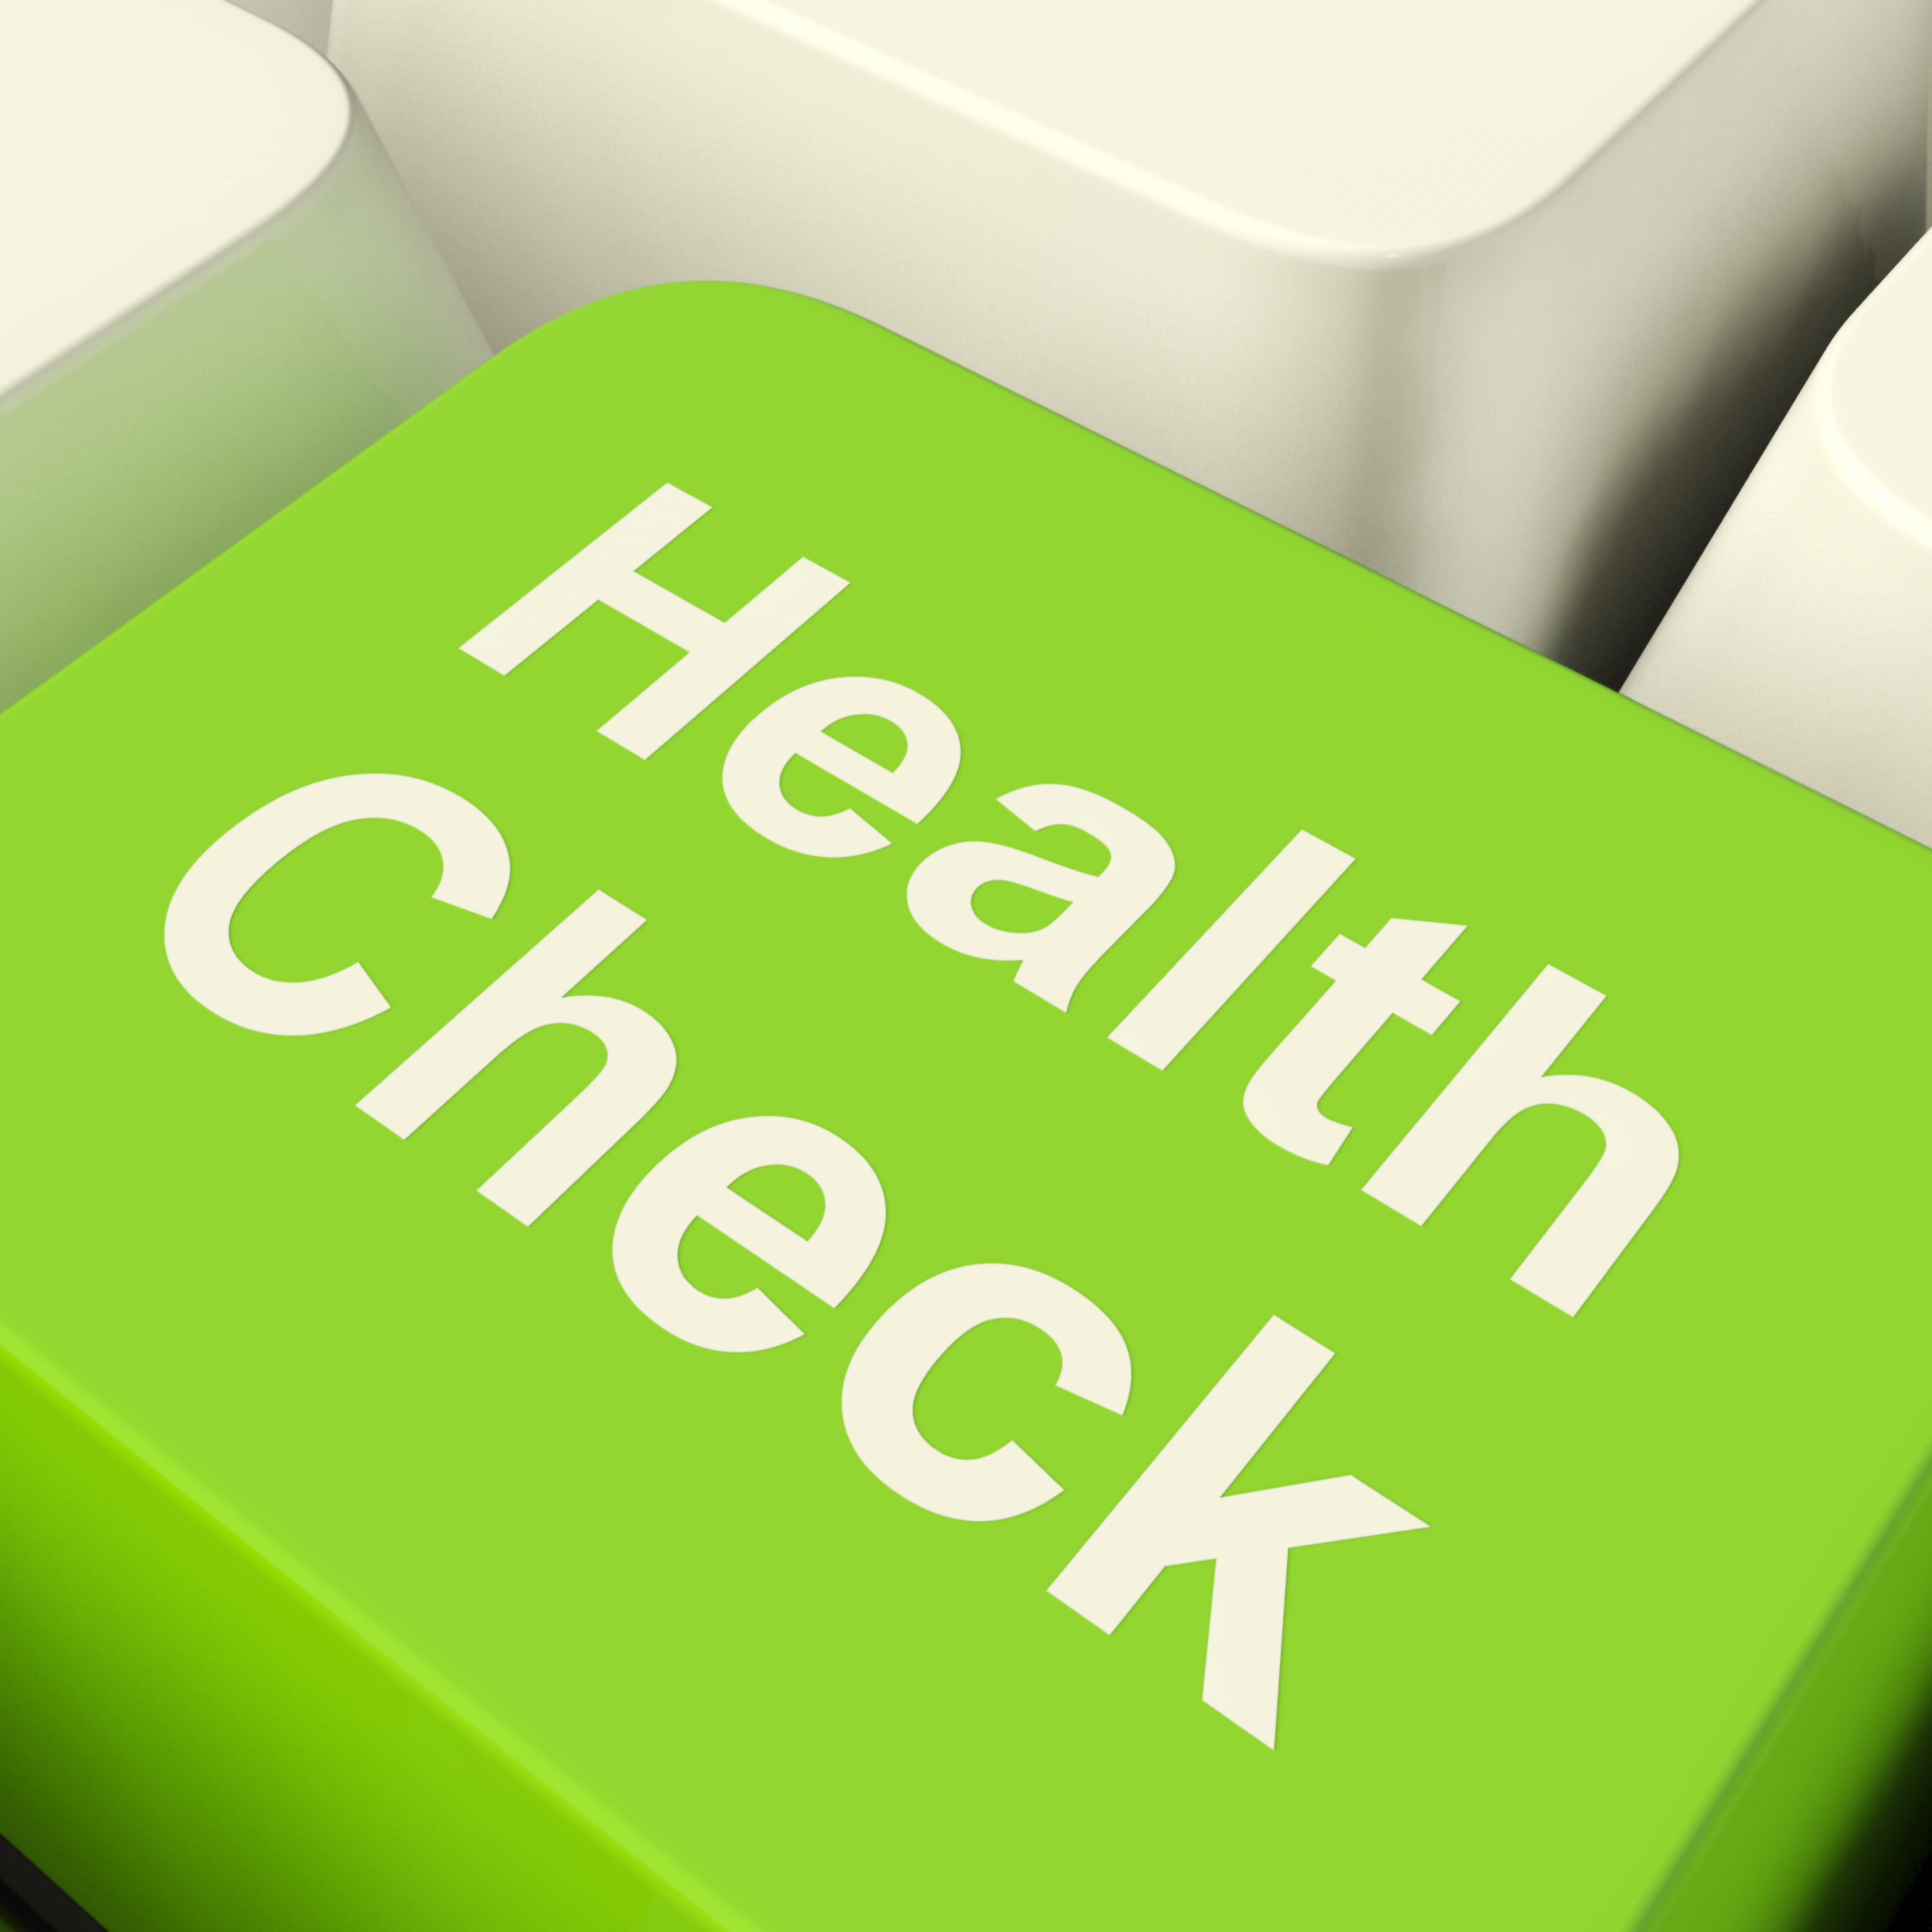 Check the health of your organisation by doing our ‘Aged Care Health Check’ survey.